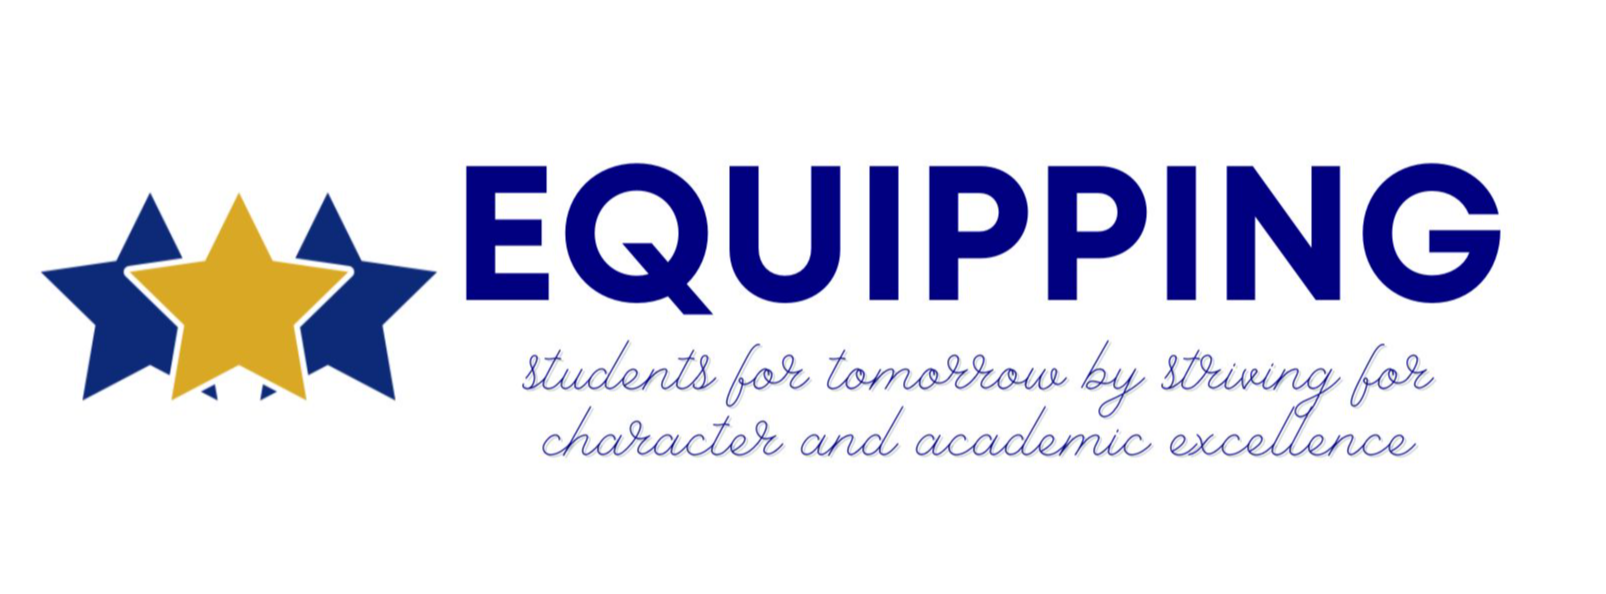 equipping students for tomorrow by striving for character and academic excellence